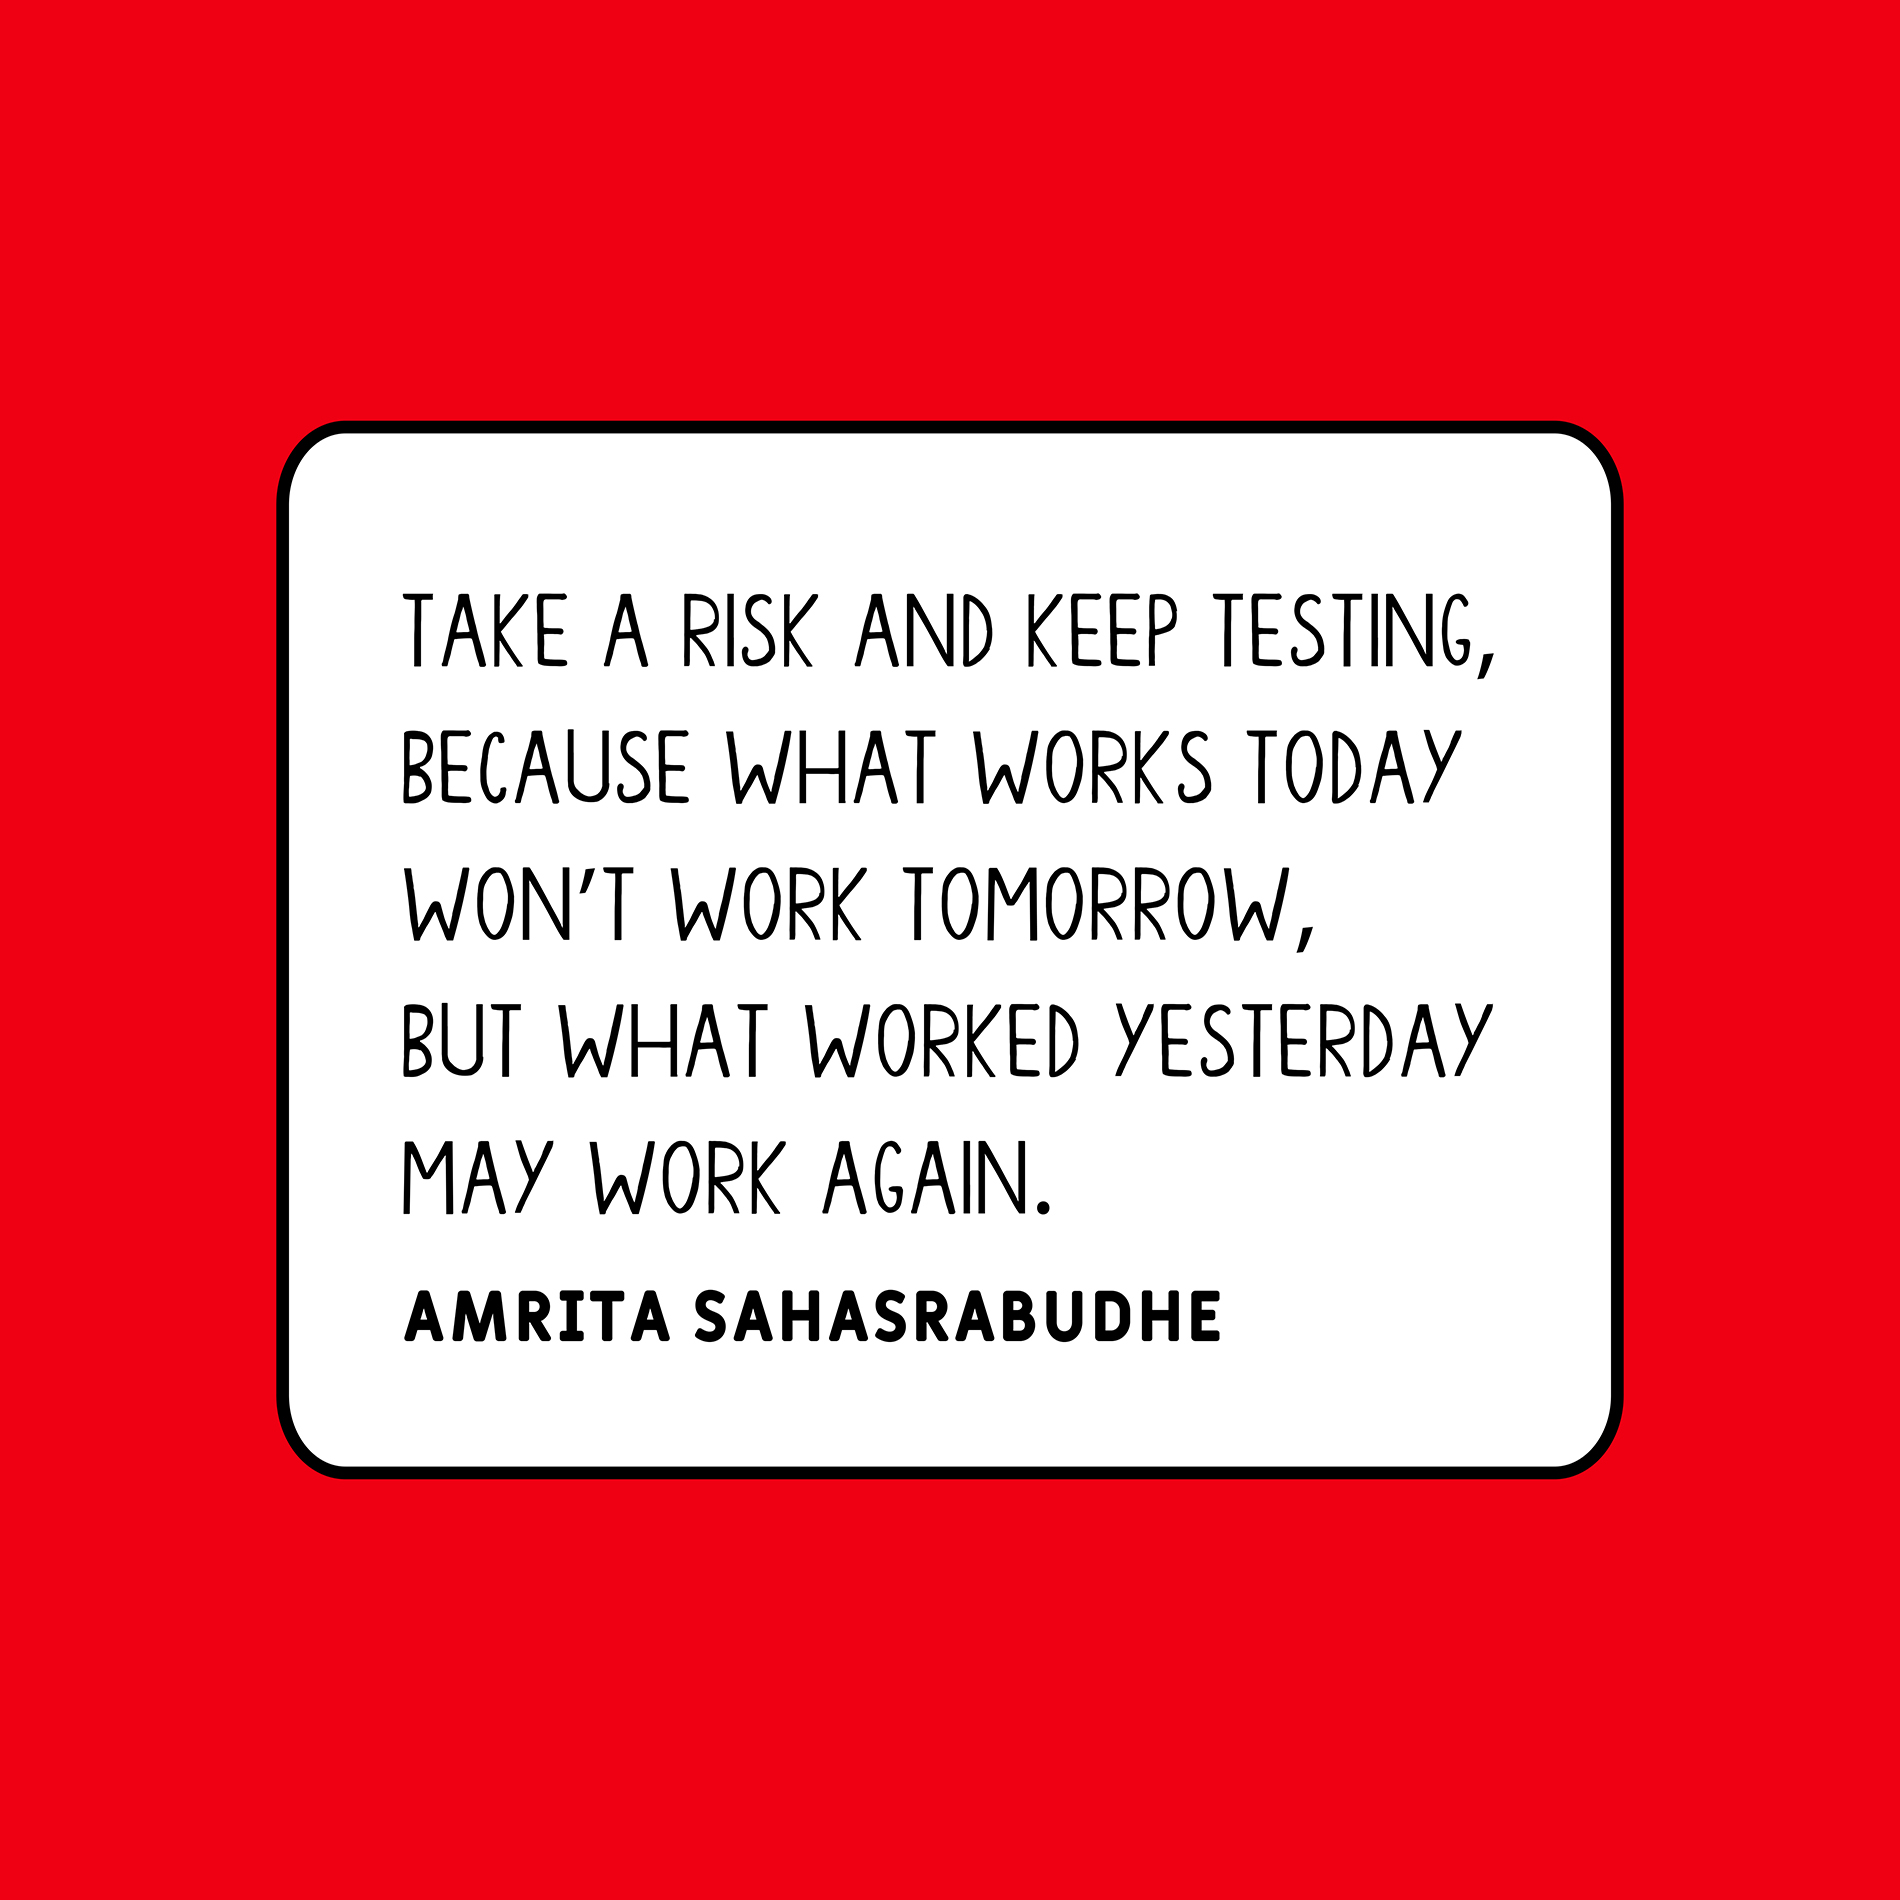 "Take a risk and keep testing, because what works today won’t work tomorrow, but what worked yesterday may work again.” — Amrita Sahasrabudhe